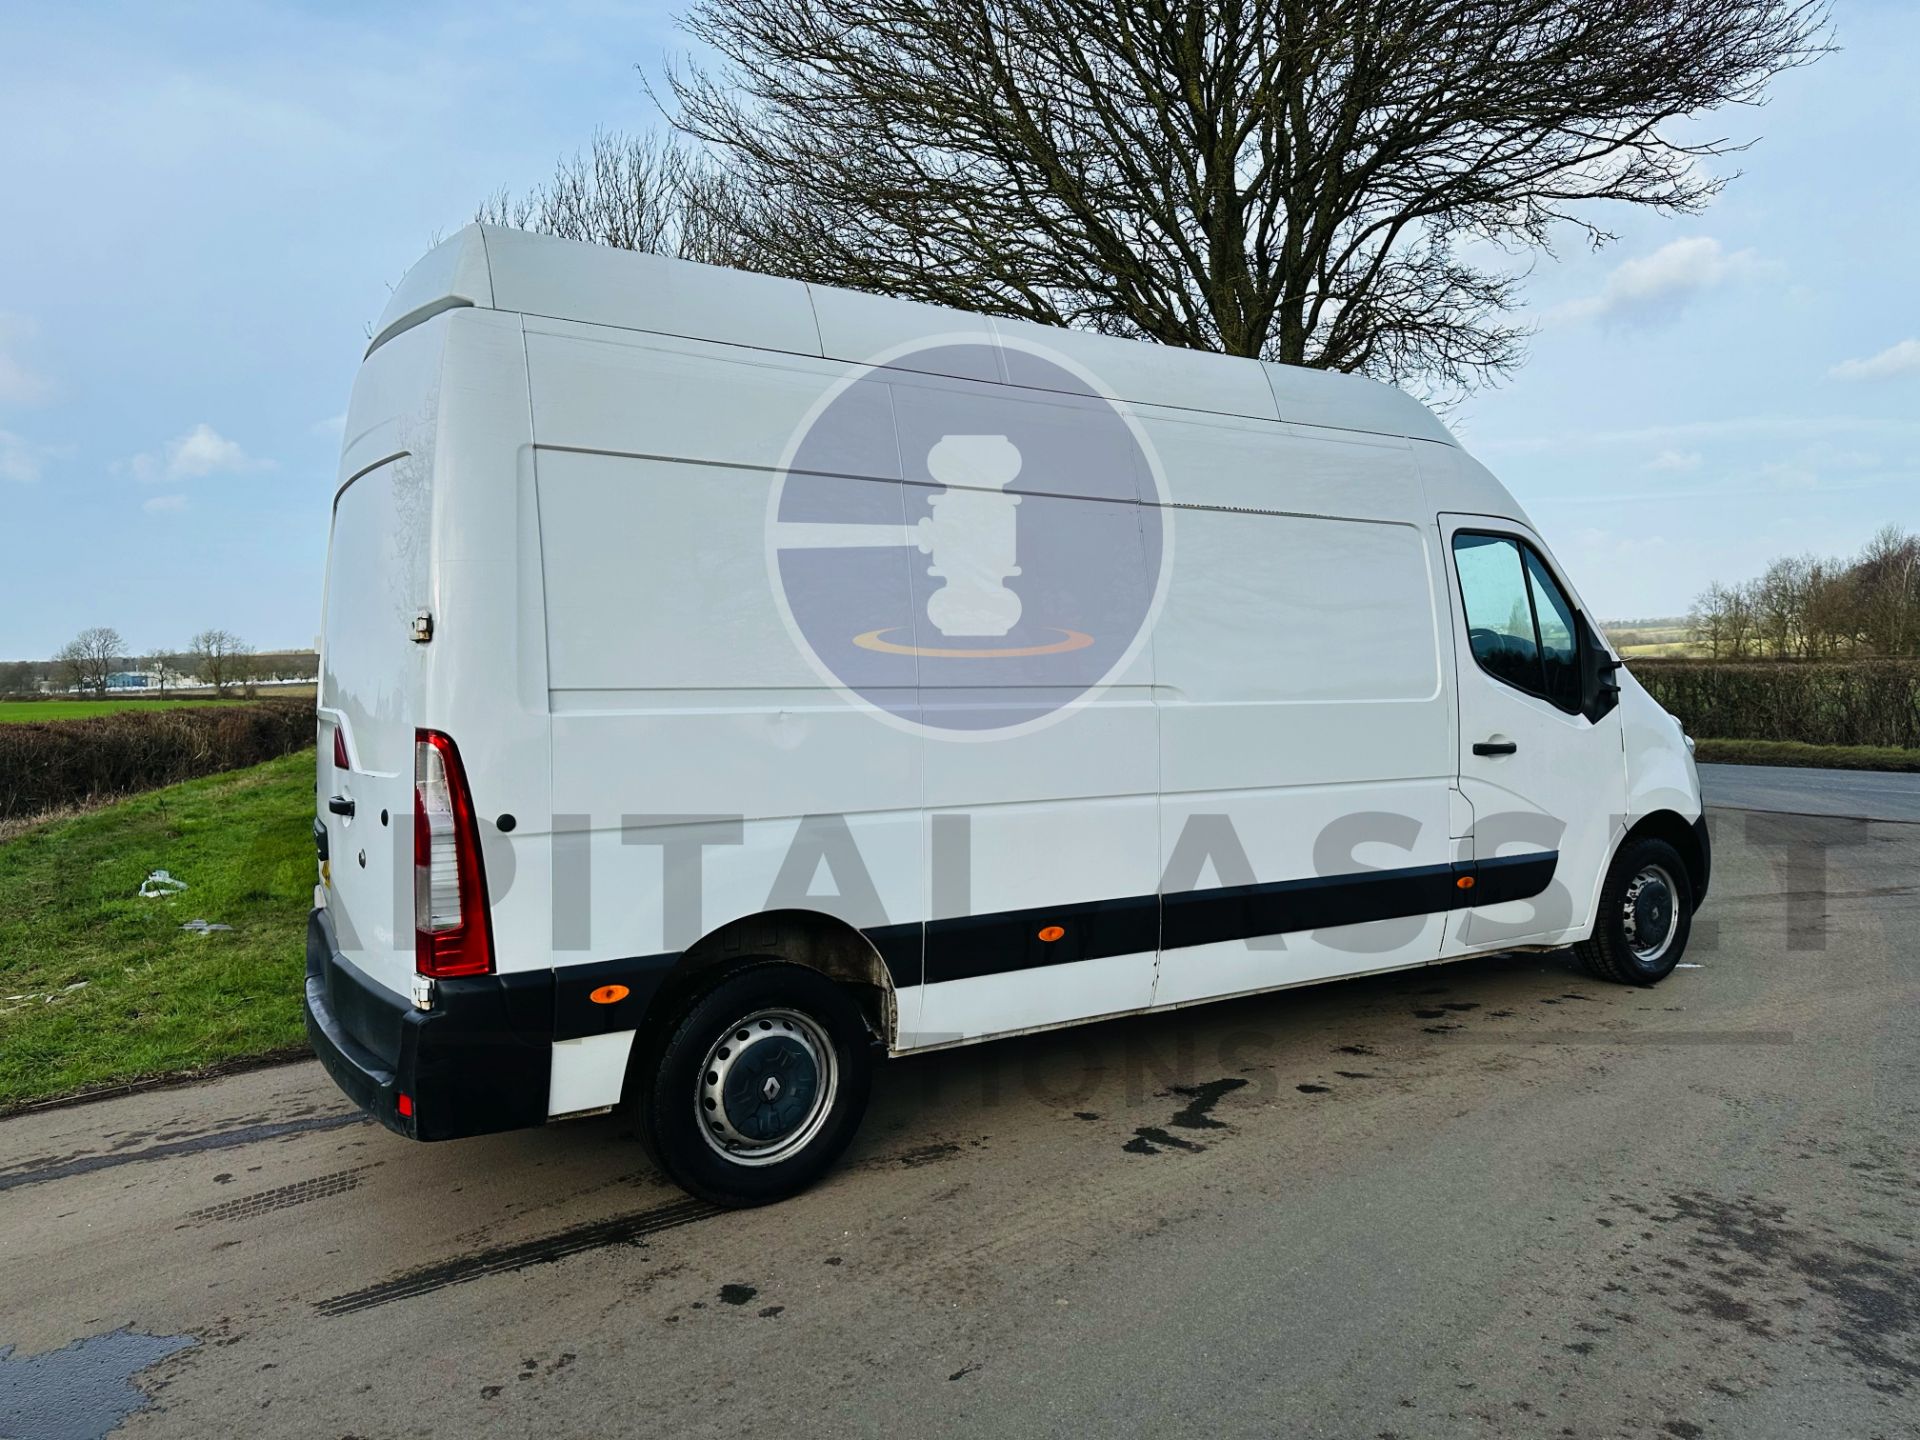 (On Sale) RENAULT MASTER *BUSINESS ENERGY* LWB EXTRA HI-ROOF (2019 - EURO 6) 2.3 DCI - 145 BHP - Image 8 of 25